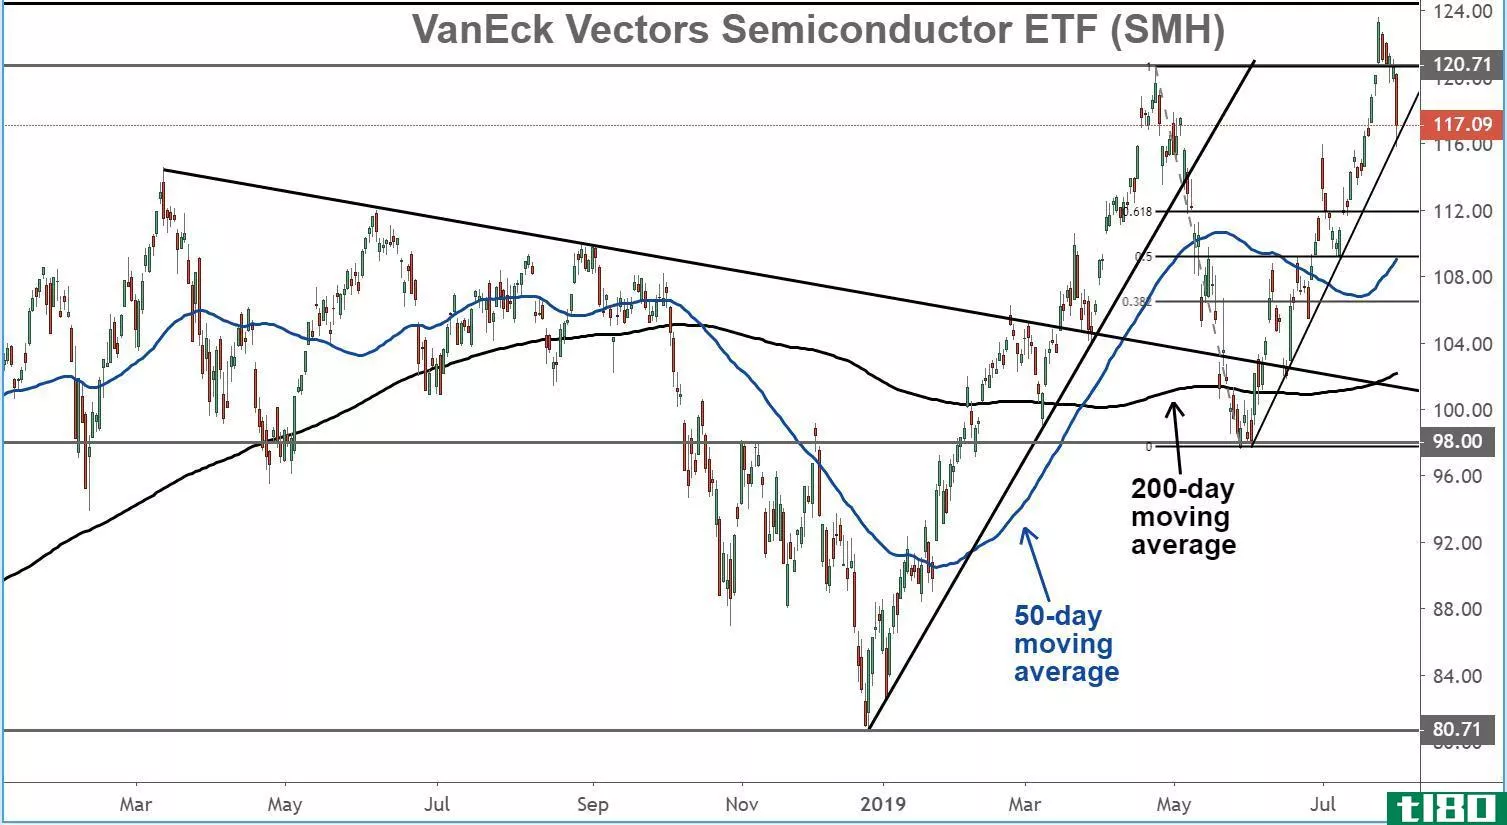 Chart showing the share price performance of the VanEck Vectors Semiconductor ETF (SMH)